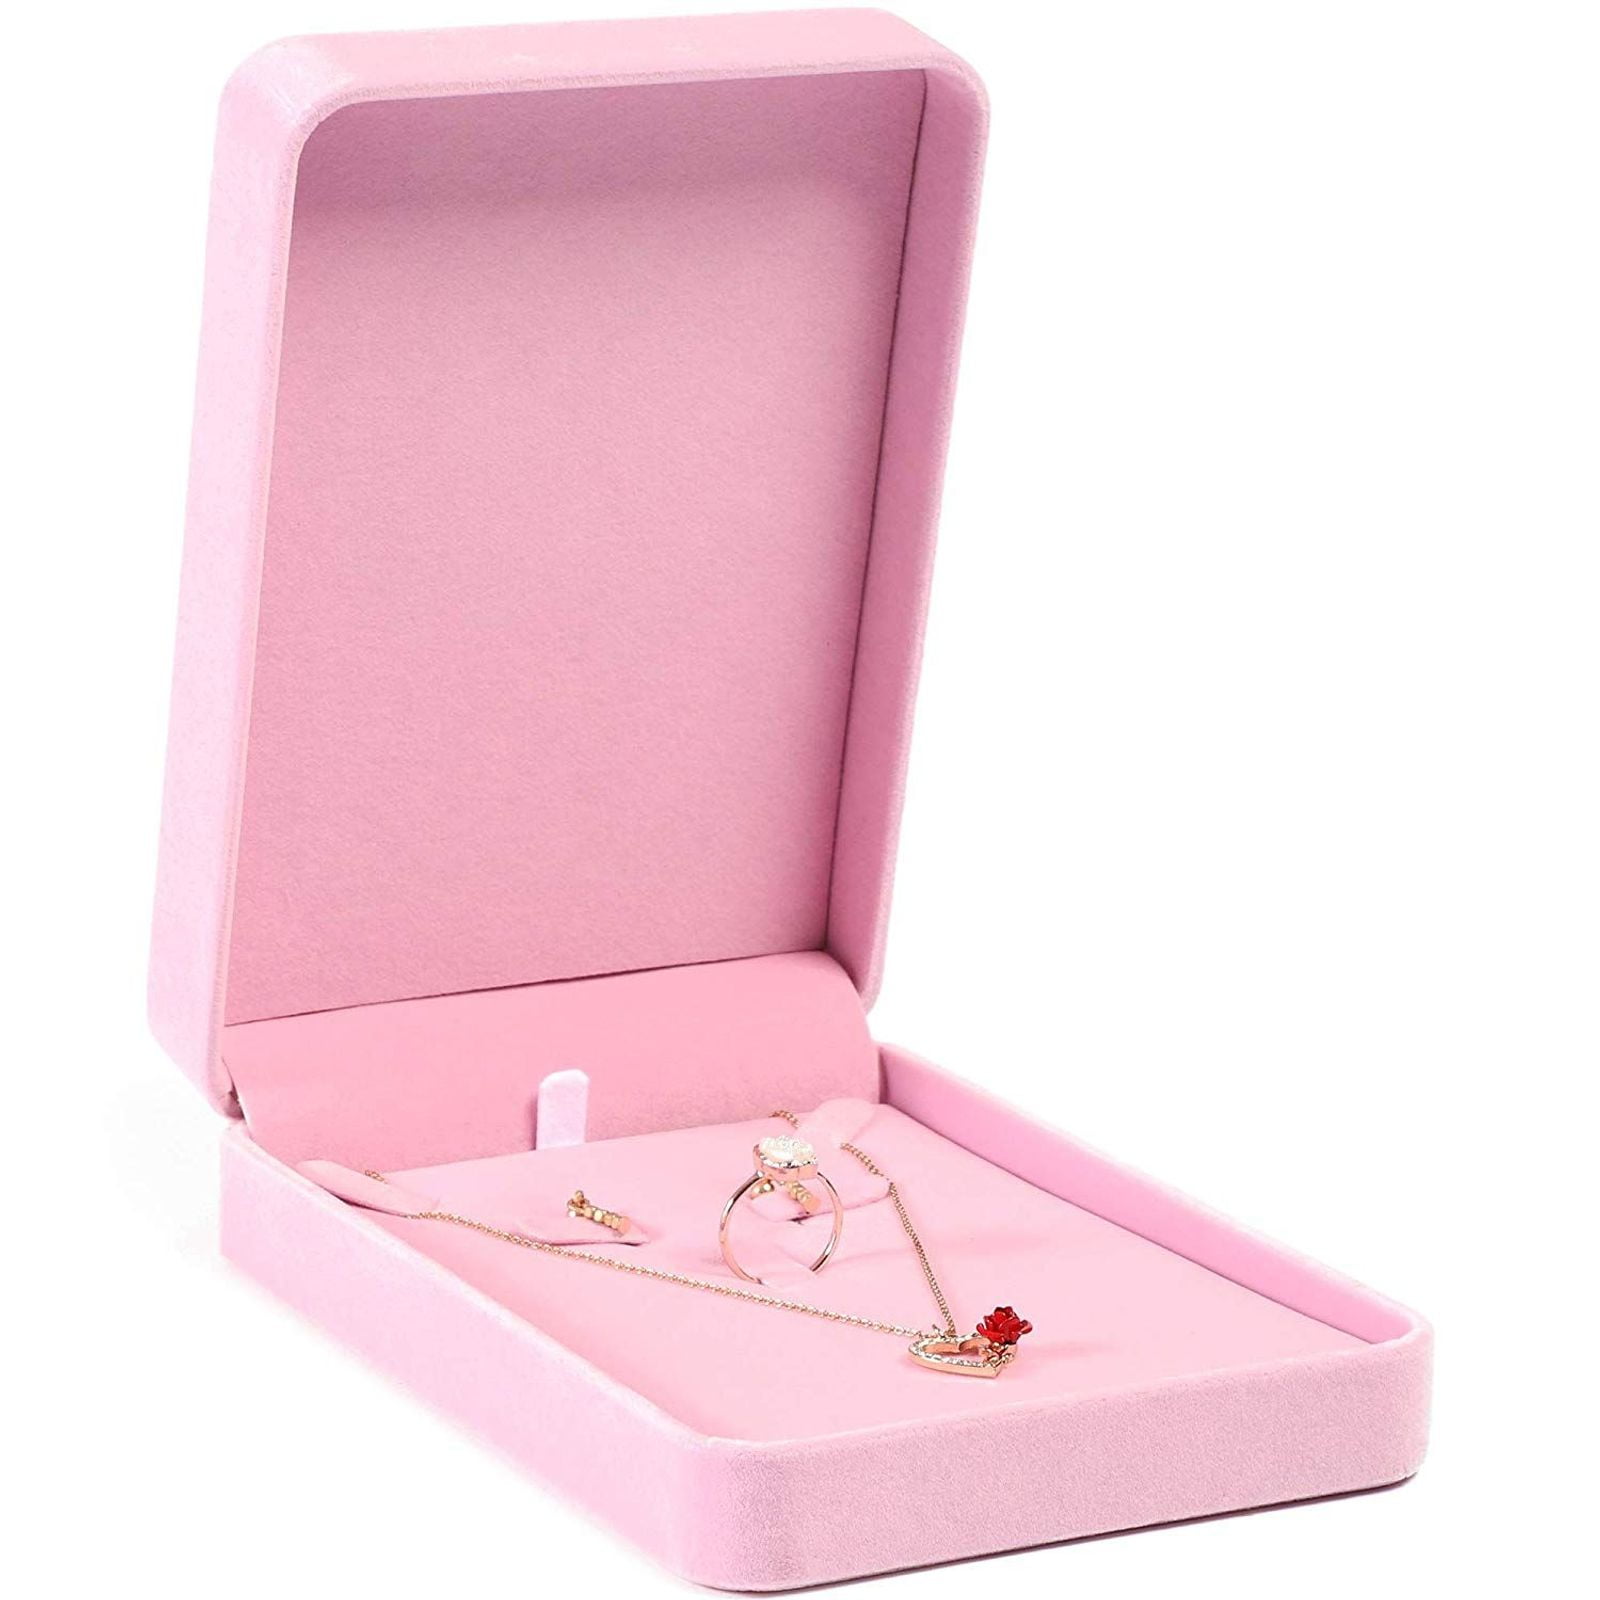 1 Piece Small Jewelry Box Velvet Wedding Ring Box Necklace Display Box Cute  Bear Gift Box Container Case For Jewelry Packaging